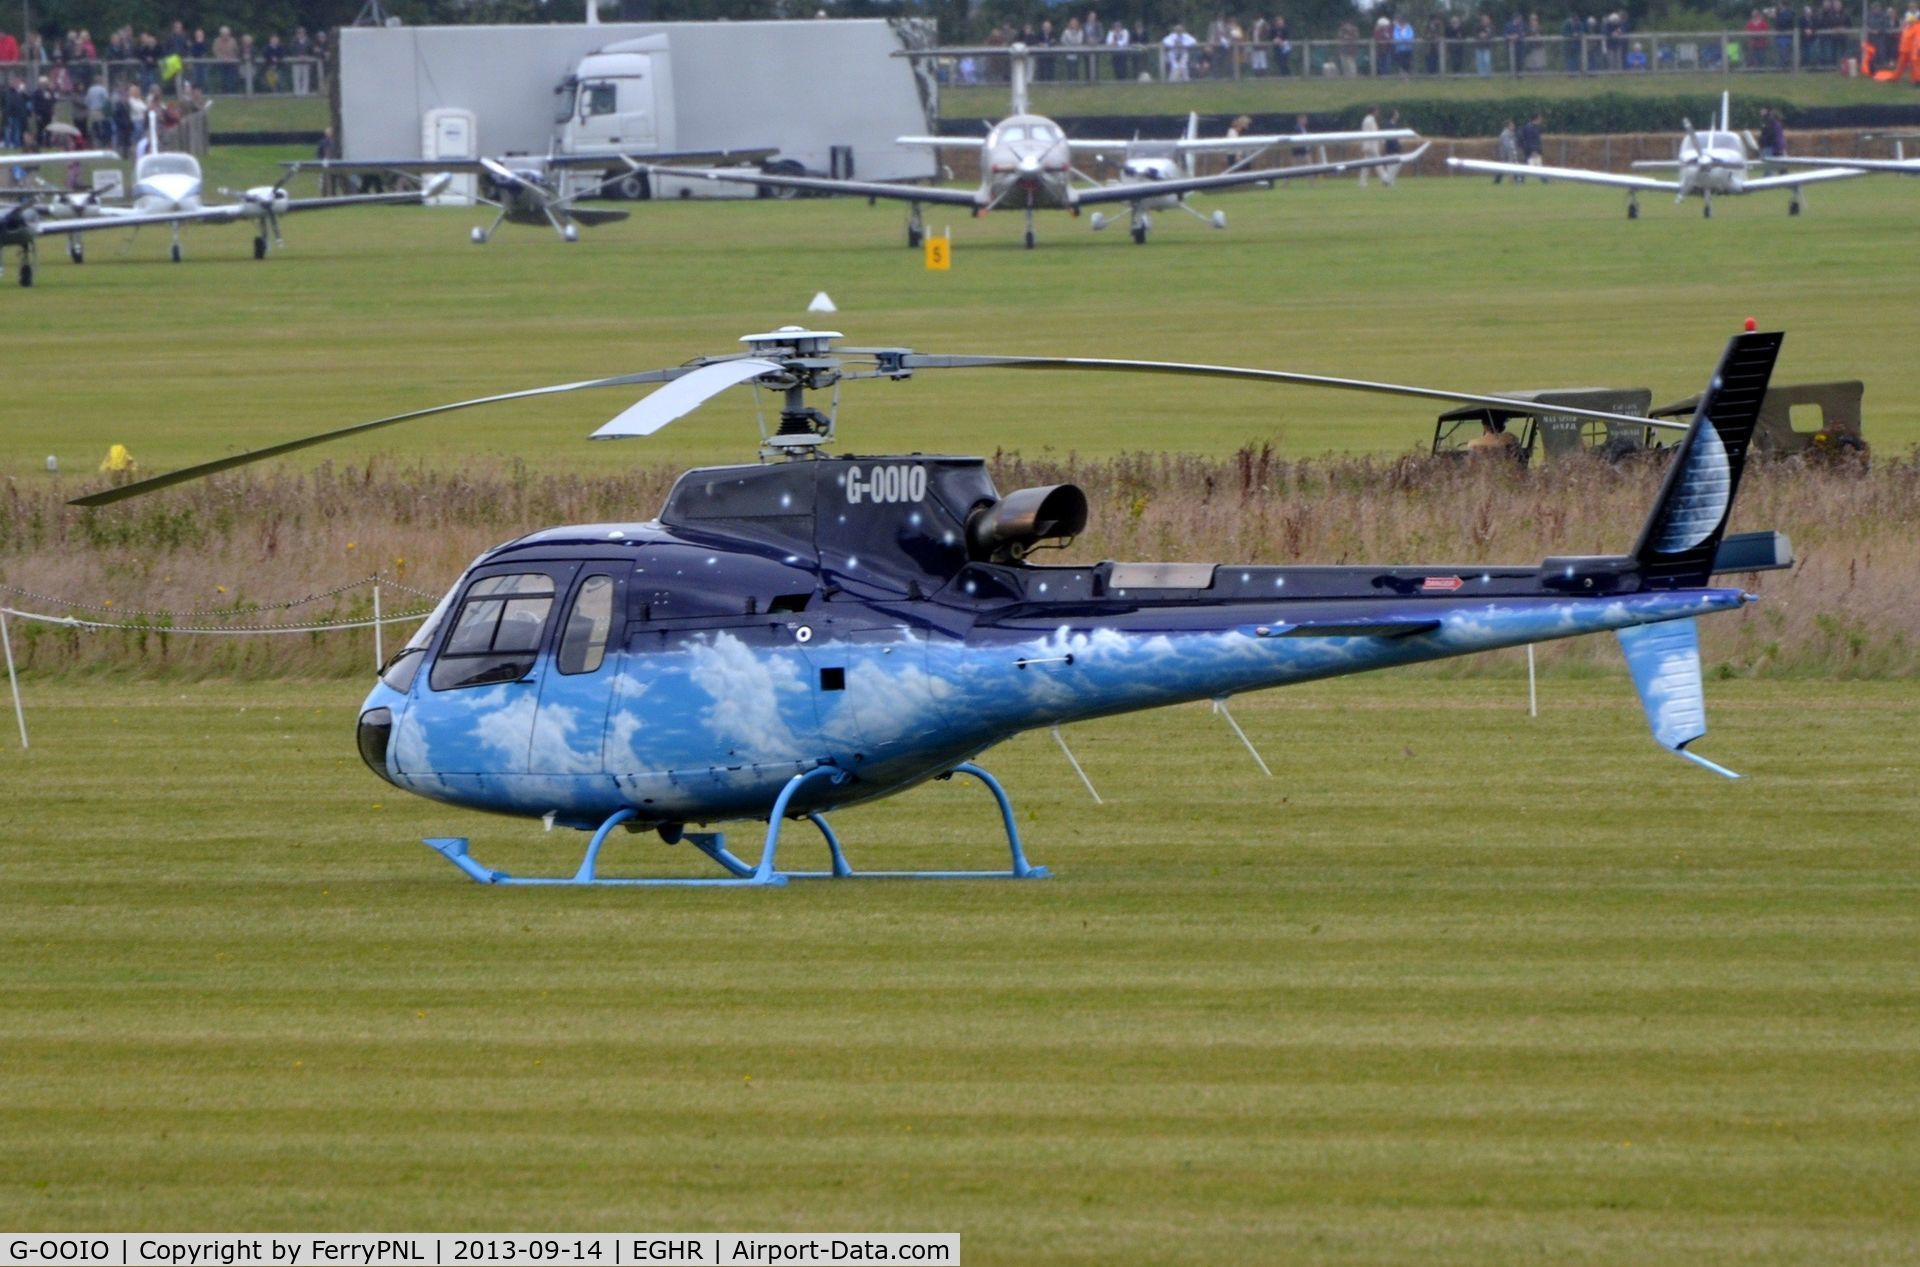 G-OOIO, 2001 Eurocopter AS-350B-3 Ecureuil Ecureuil C/N 3463, AS350 during Goodwood Revival 2013